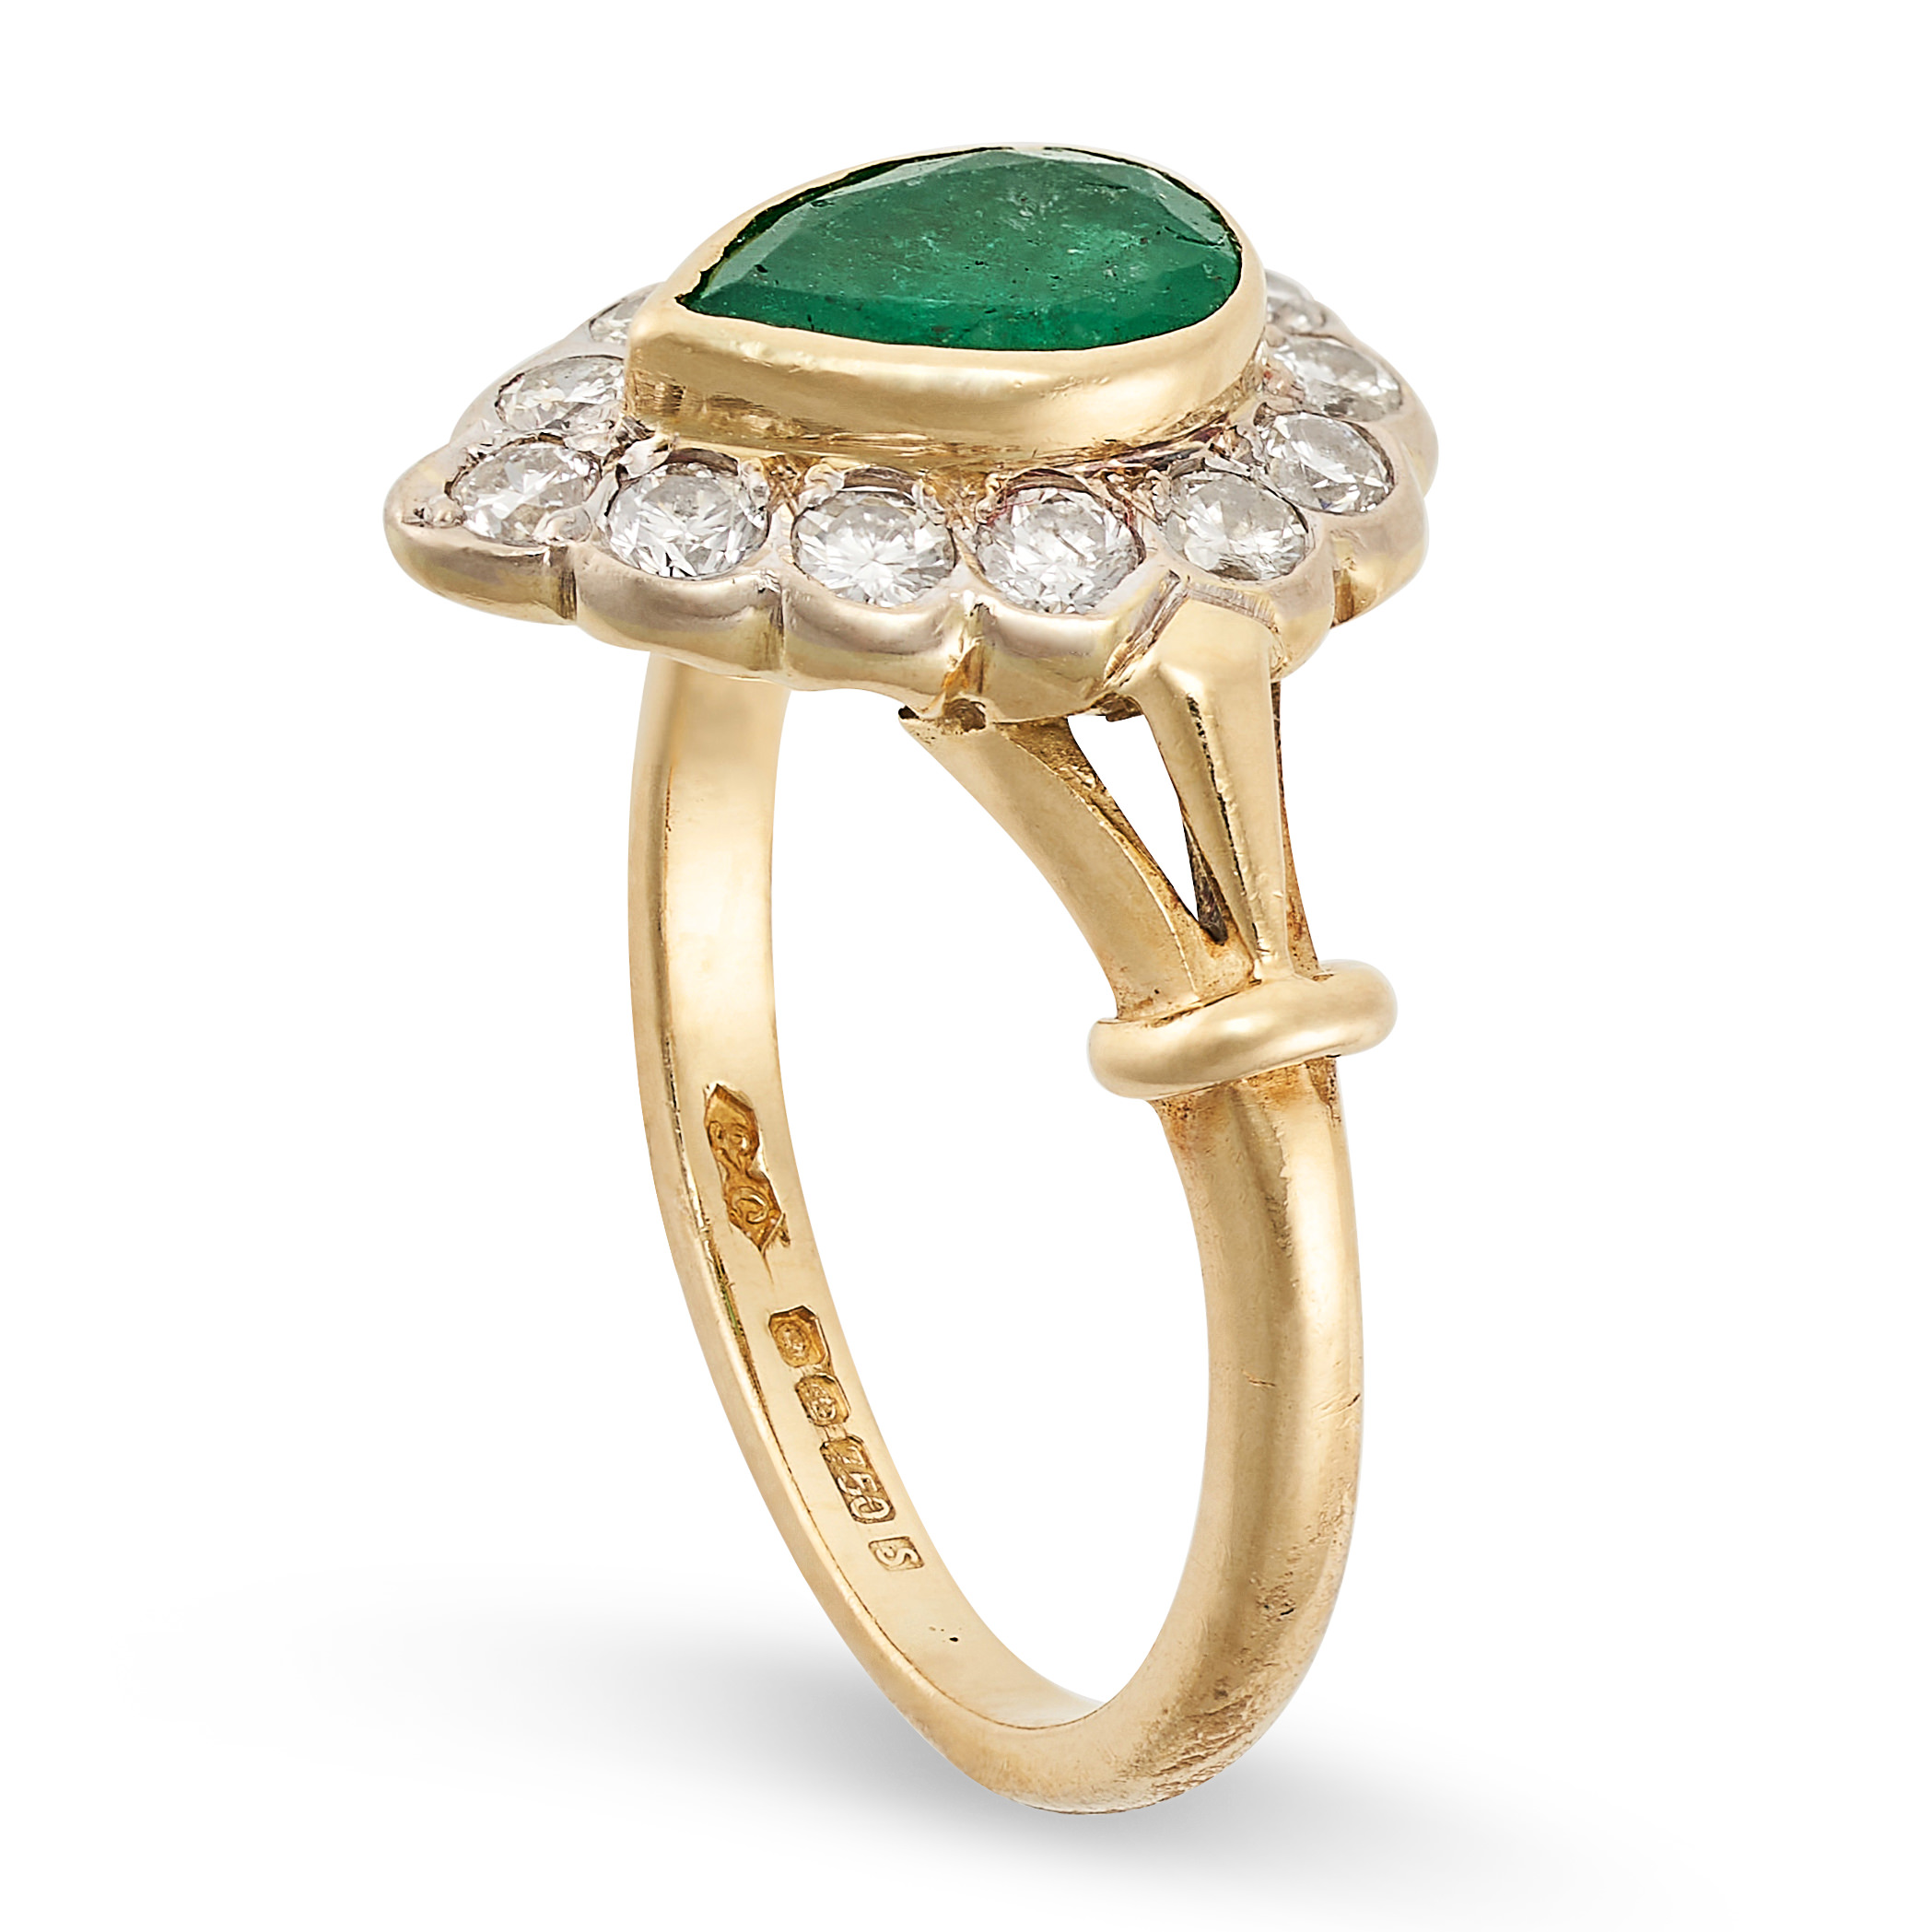 AN EMERALD AND DIAMOND RING in 18ct yellow gold, set with a pear shaped emerald in a cluster of - Image 2 of 2